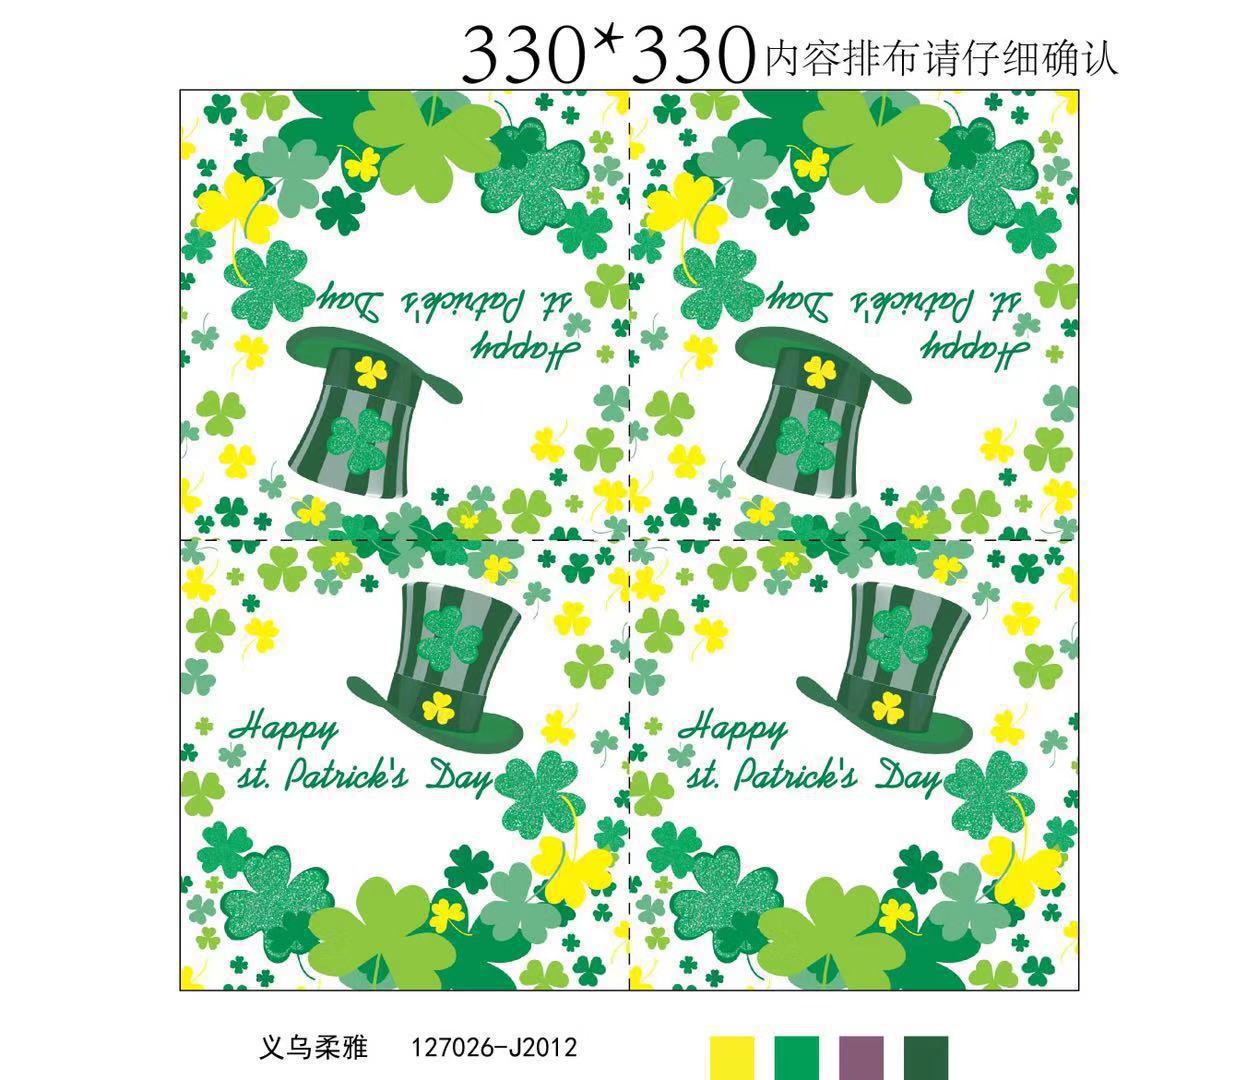 St. Patrick's Day Party Supplies eprolo